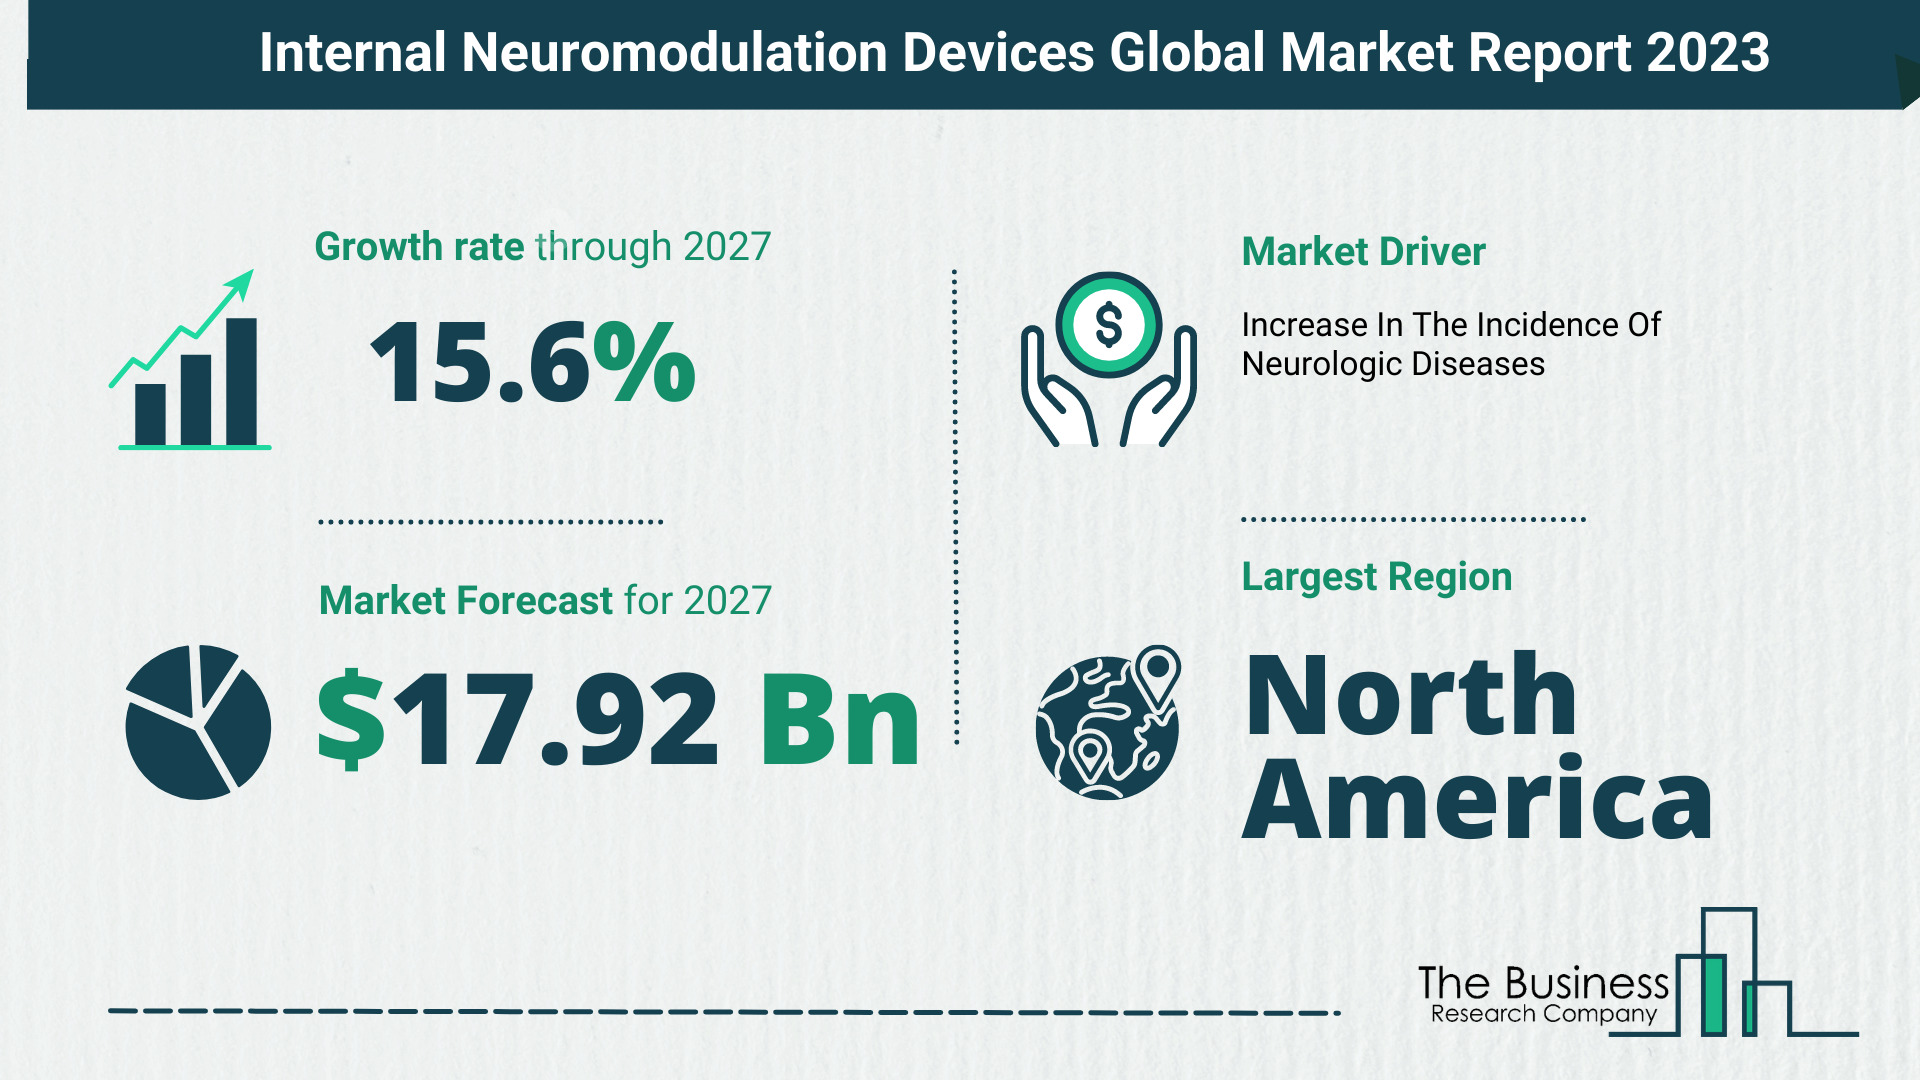 Global Internal Neuromodulation Devices Market Opportunities And Strategies 2023